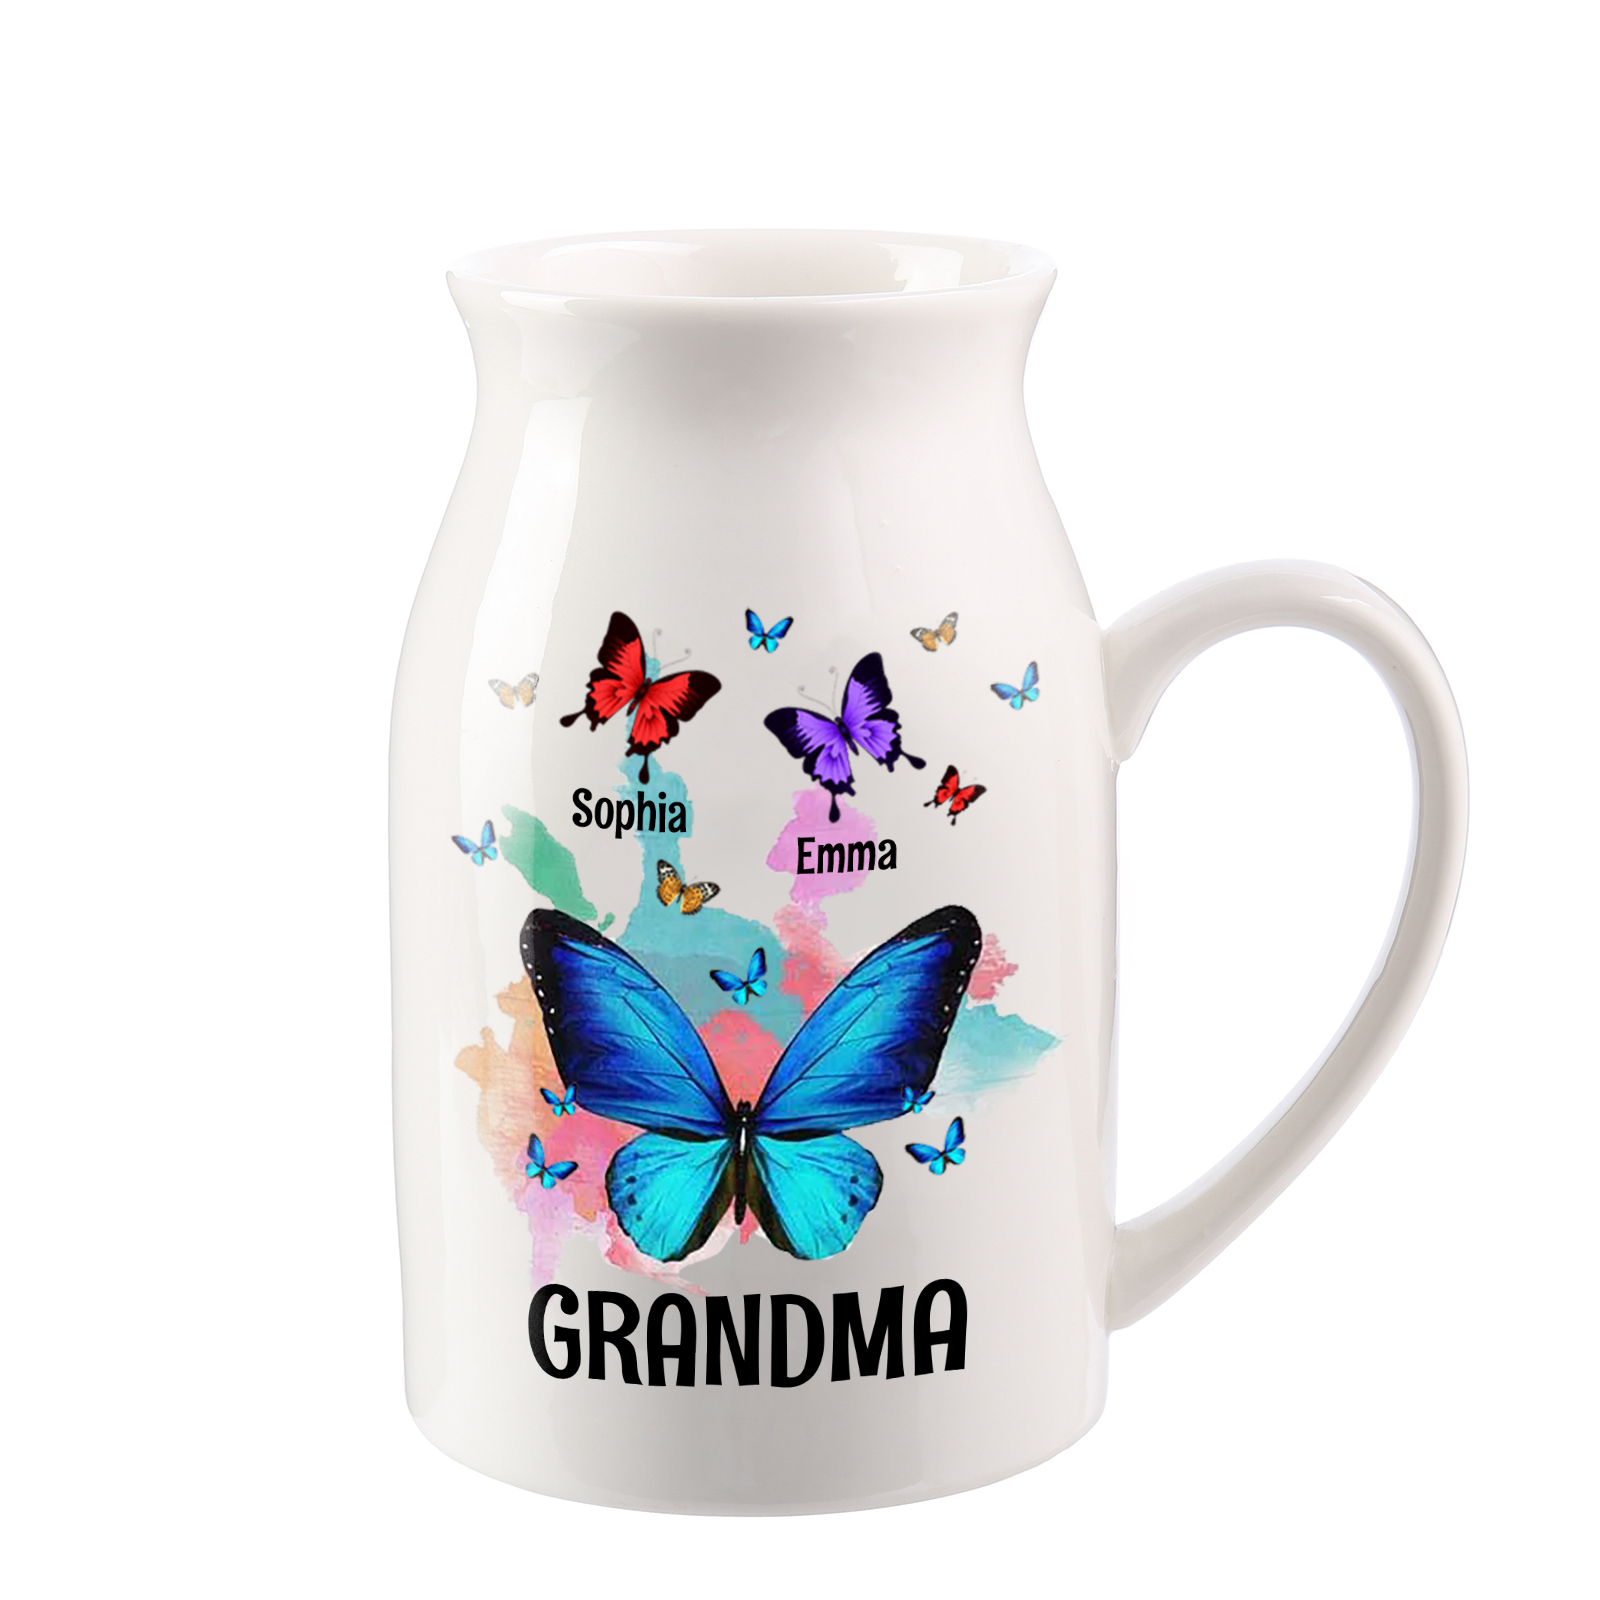 2 Names - Personalized Beautiful Colorful Butterfly Style Ceramic Vase